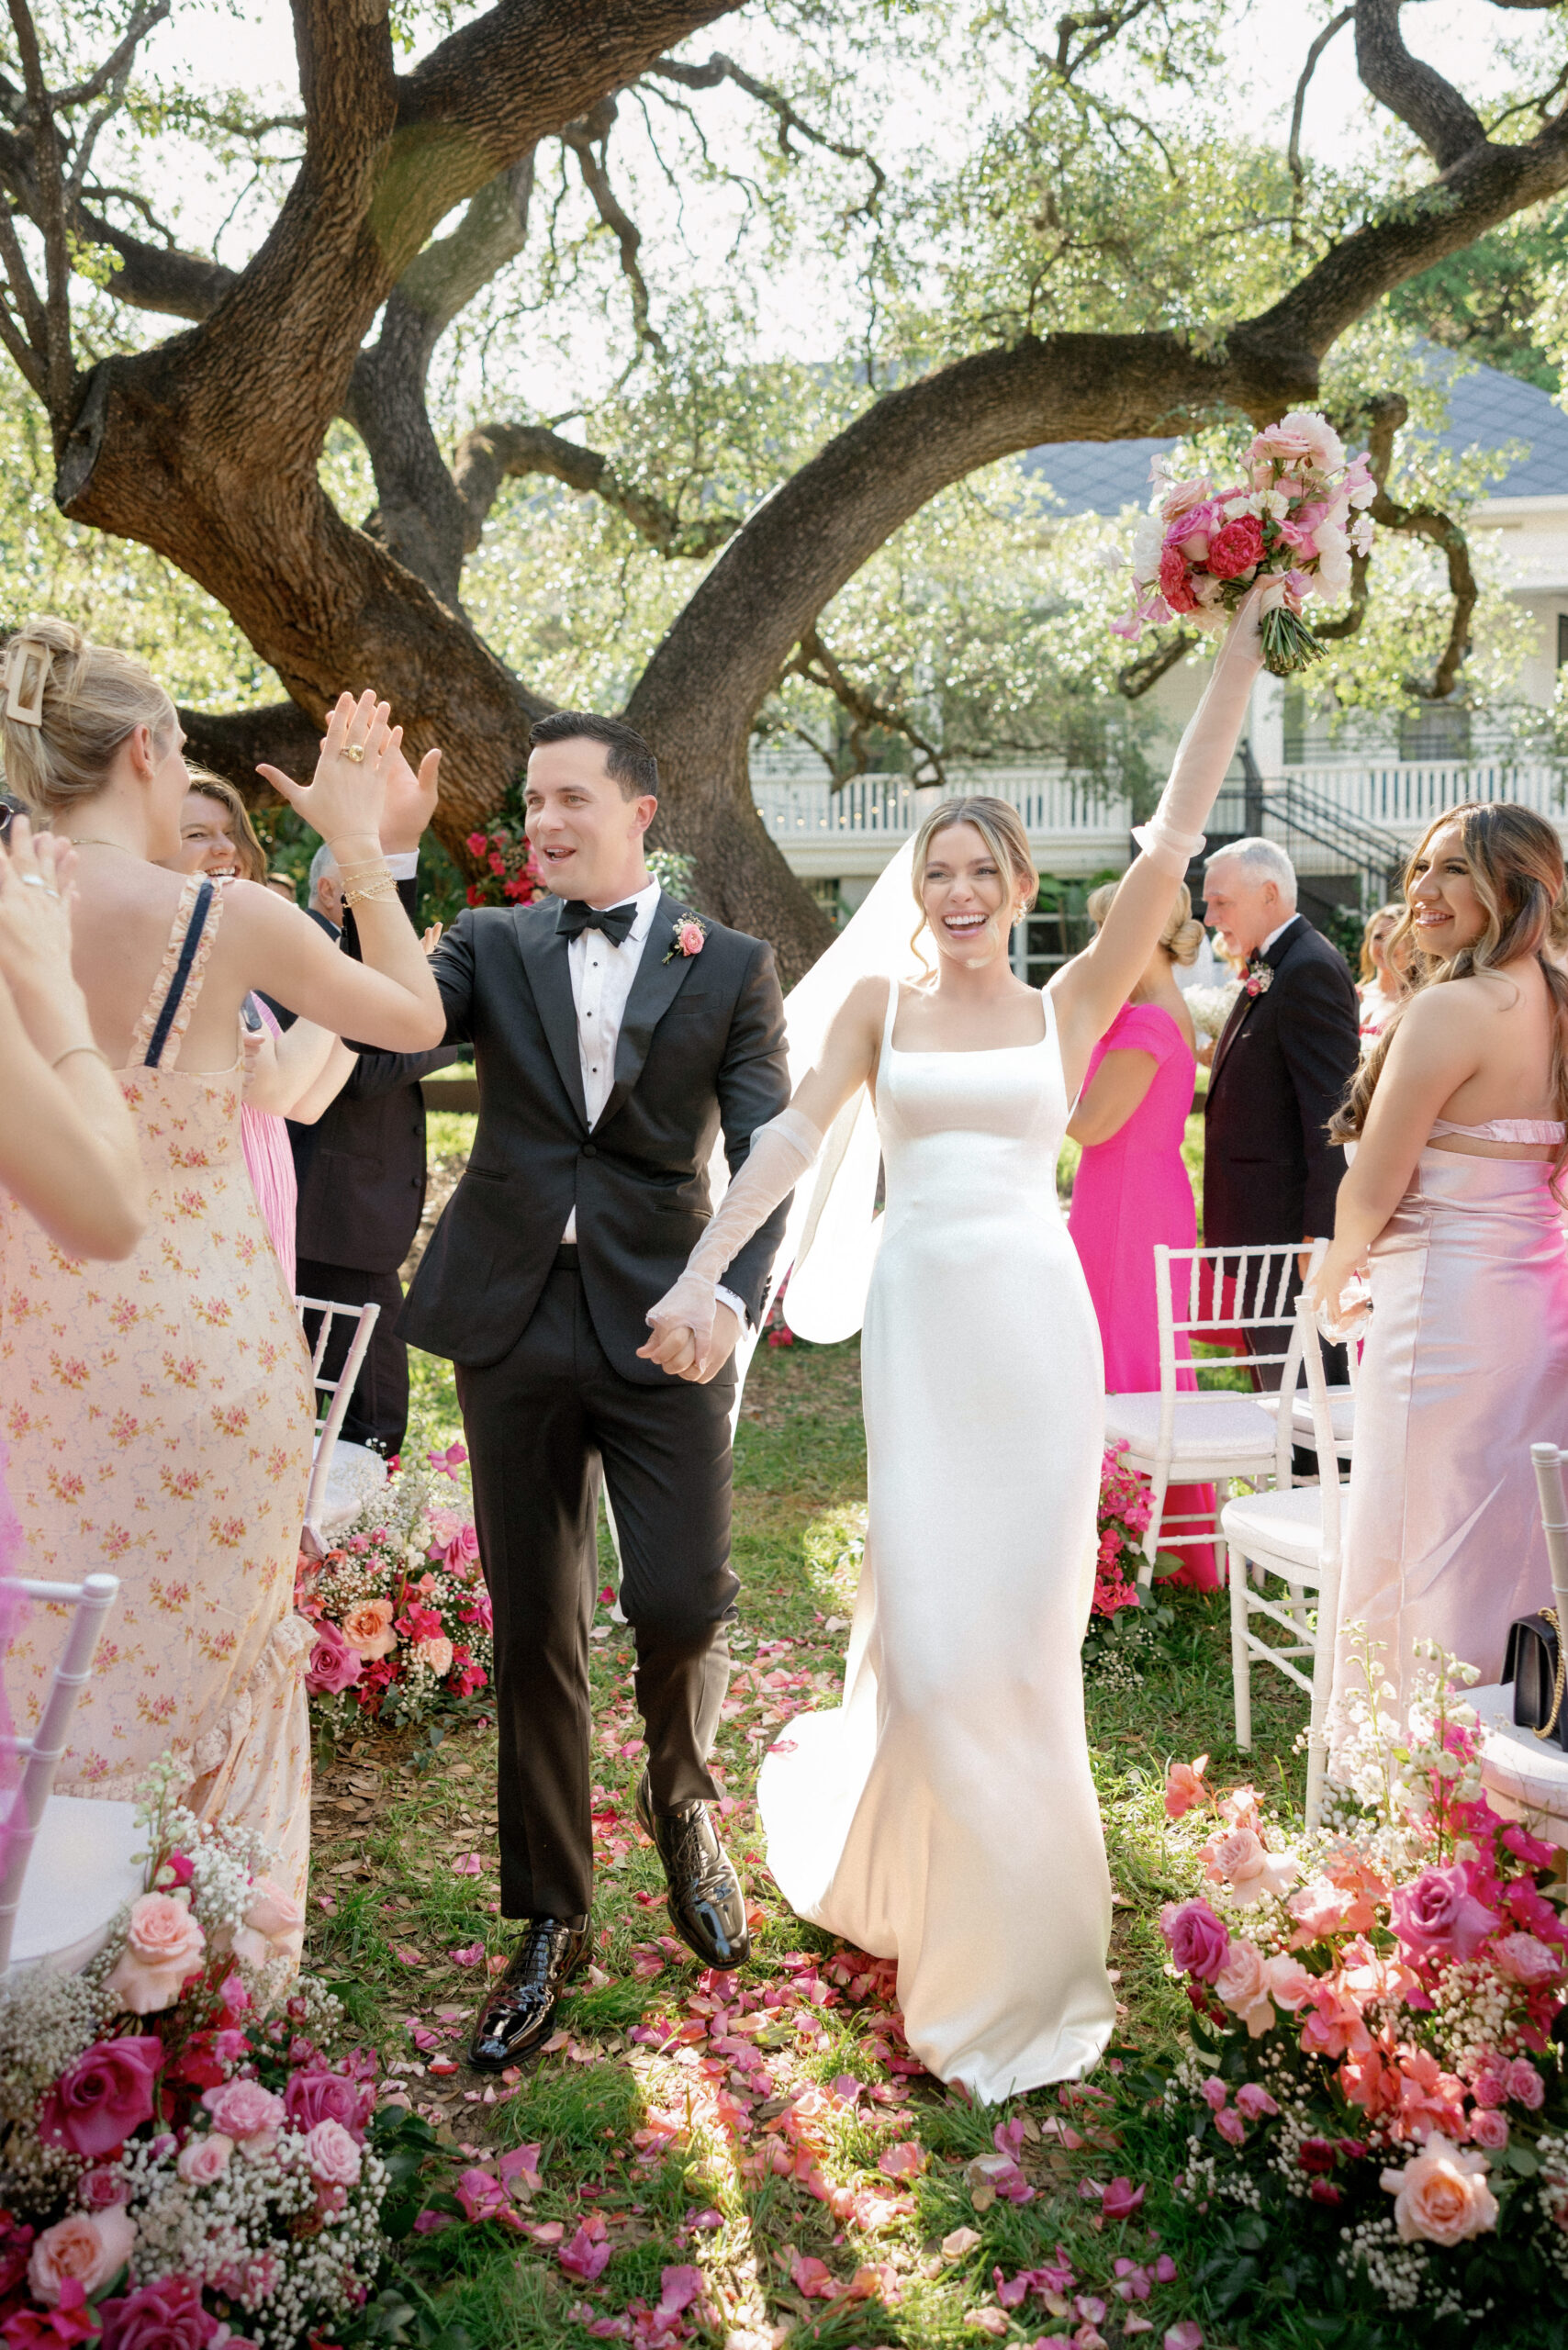 Bride and groom at their pink-themed wedding in Austin, Texas at Hotel Saint Cecilia and Skybox on 6th.